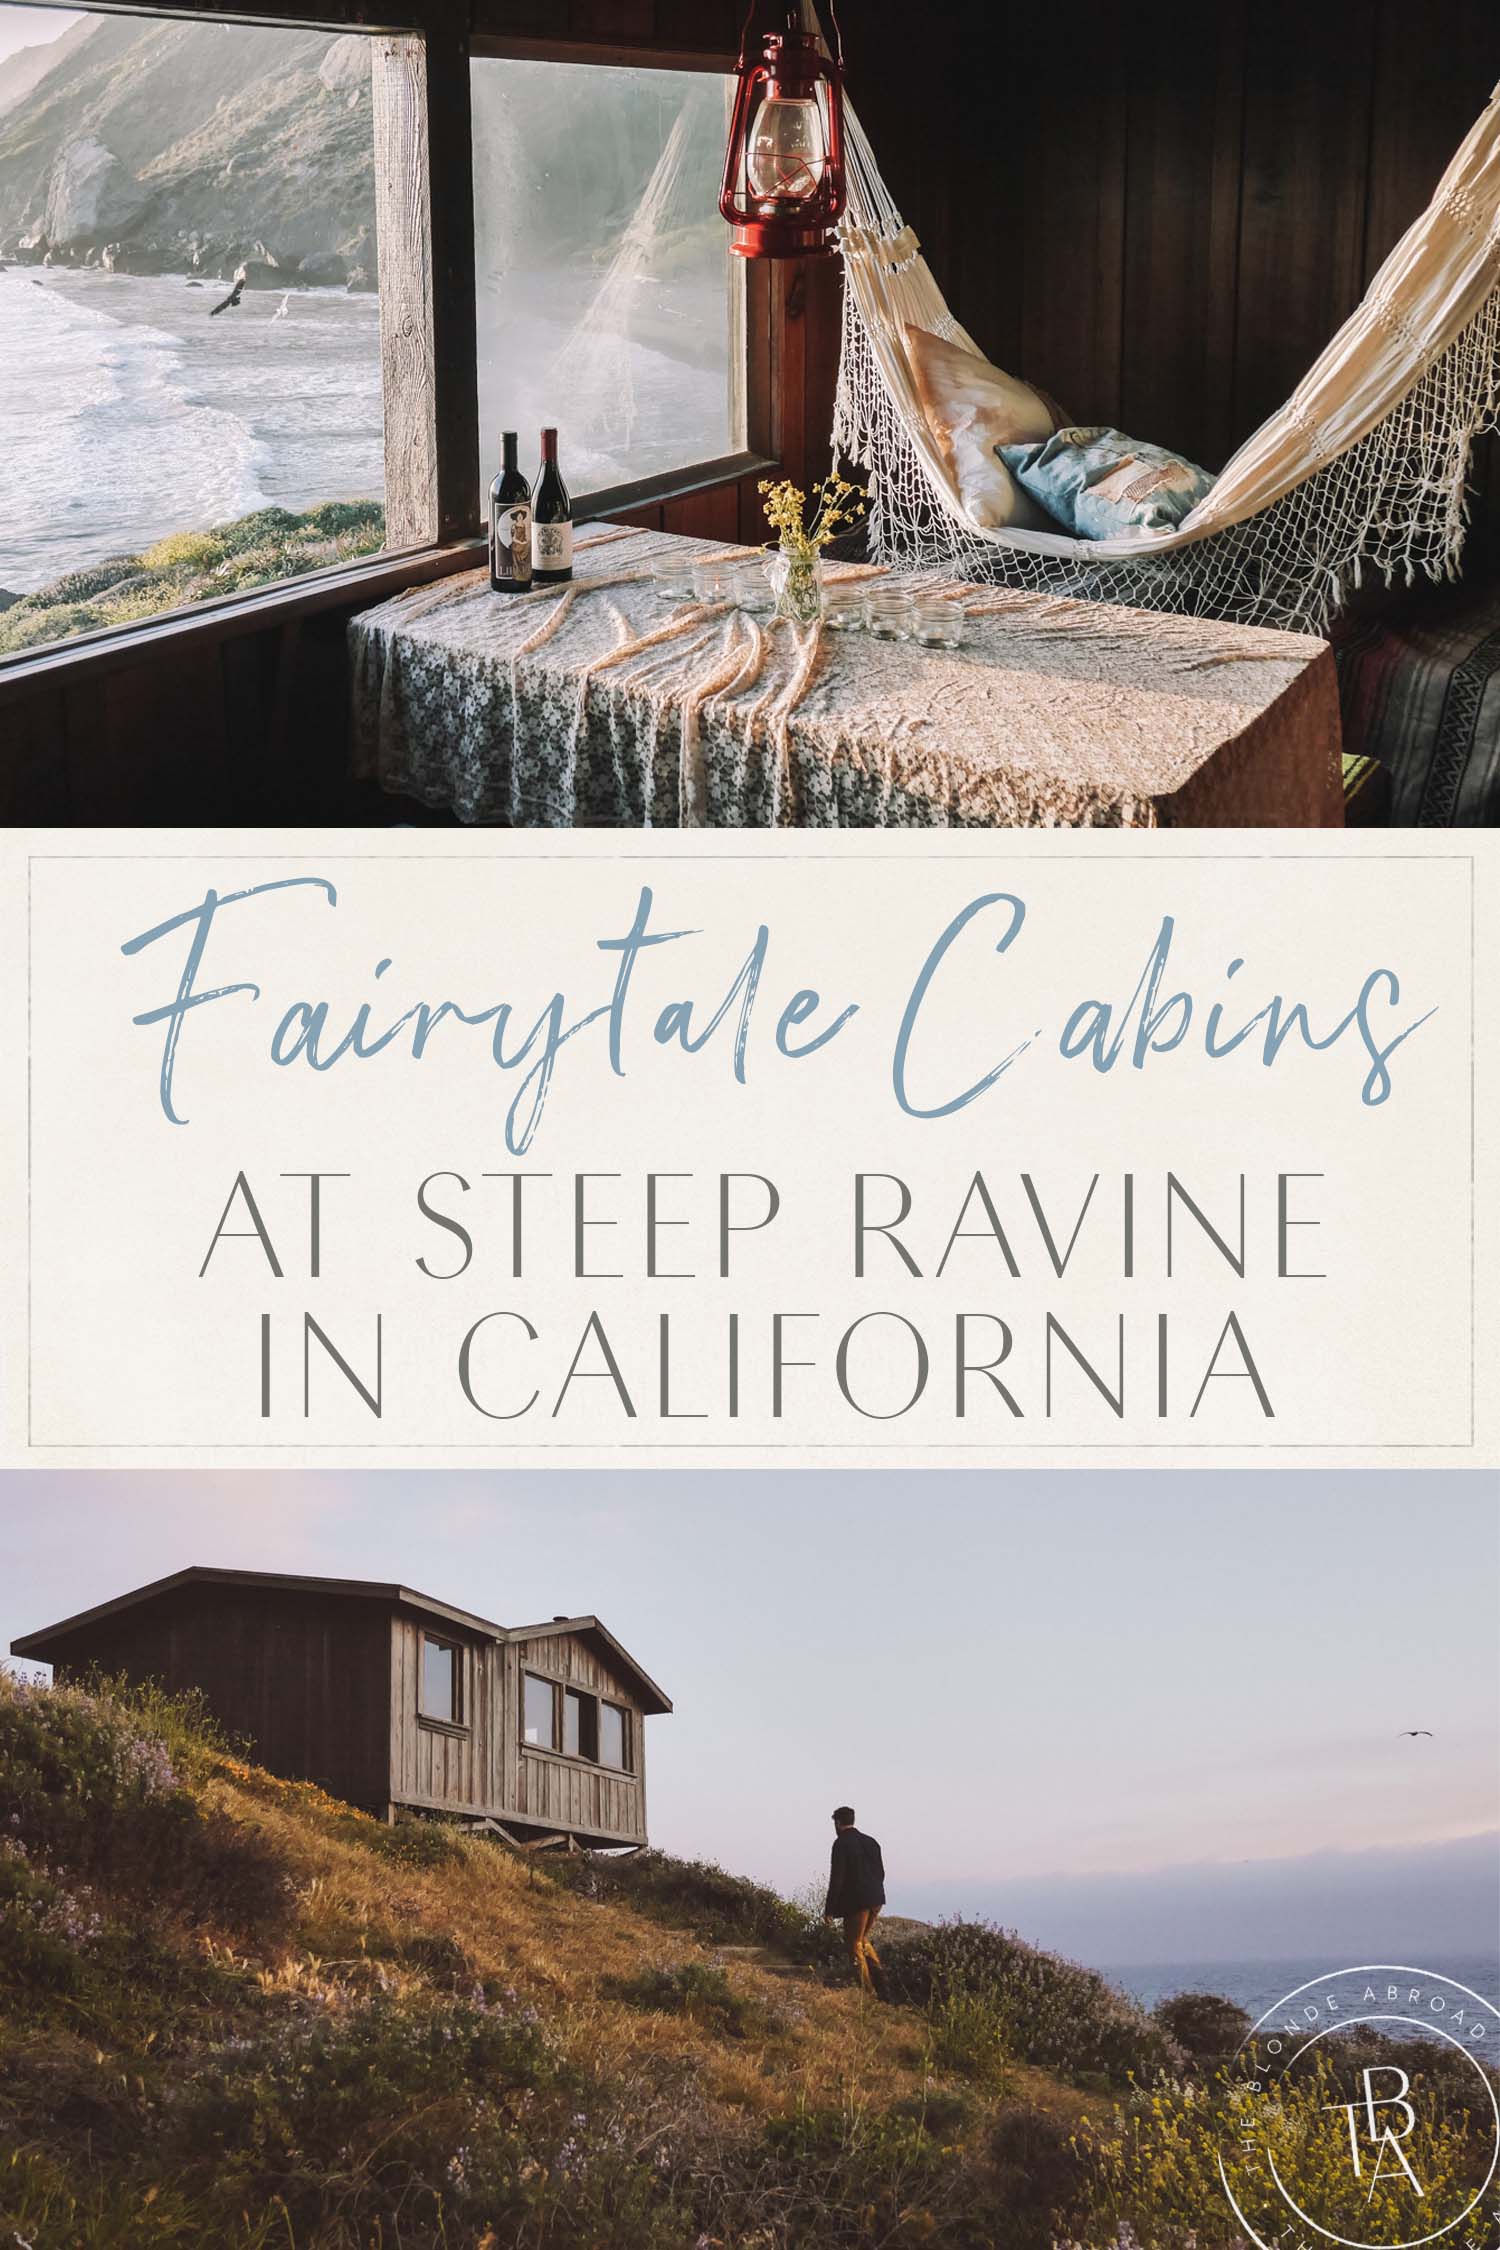 Fairytale Cabins at Steep Ravine Marin County California Cottage Core